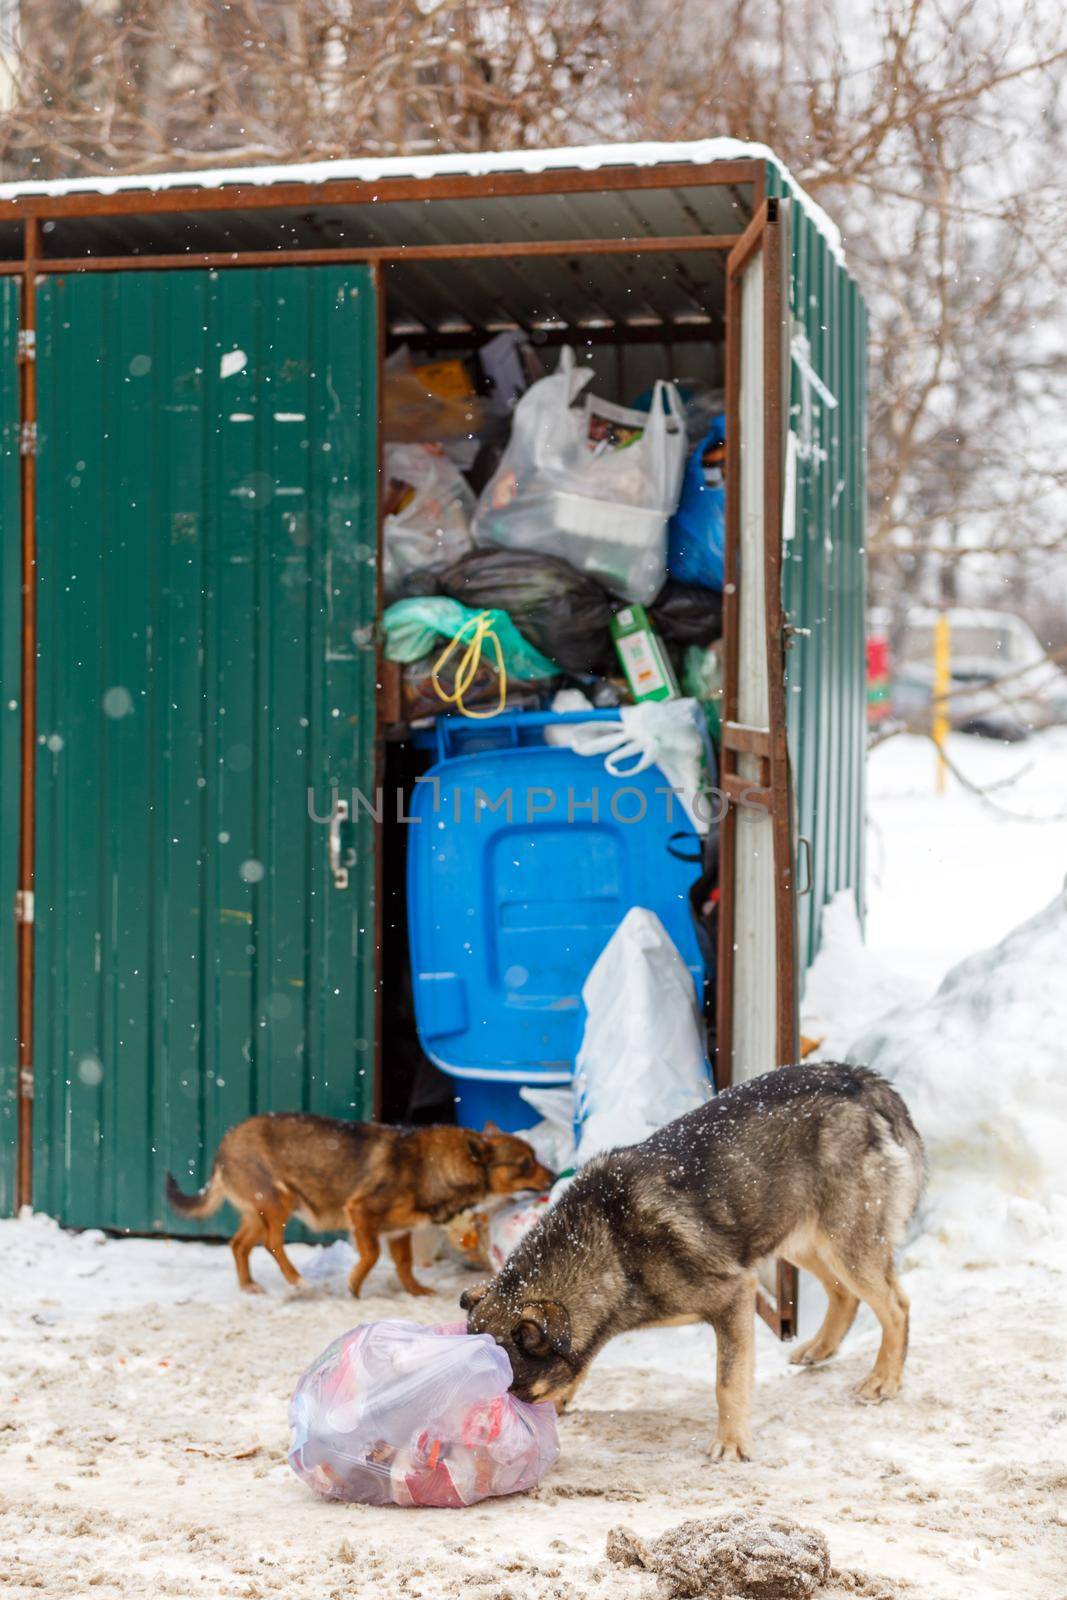 two stray dogs take away garbage bags at winter day under snowfall by z1b